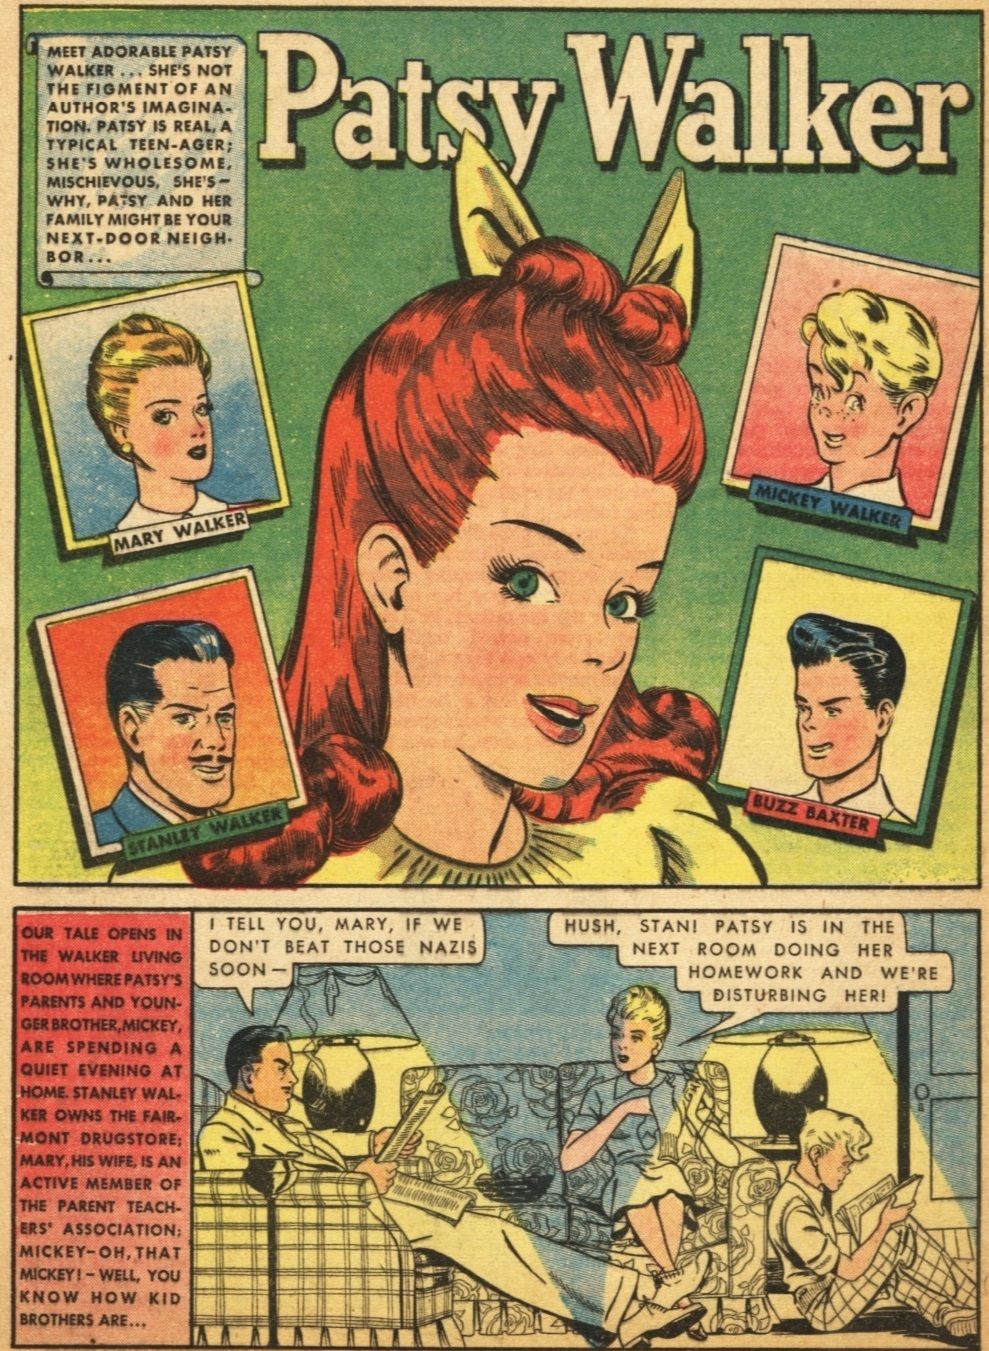 Patsy Walker made her debut